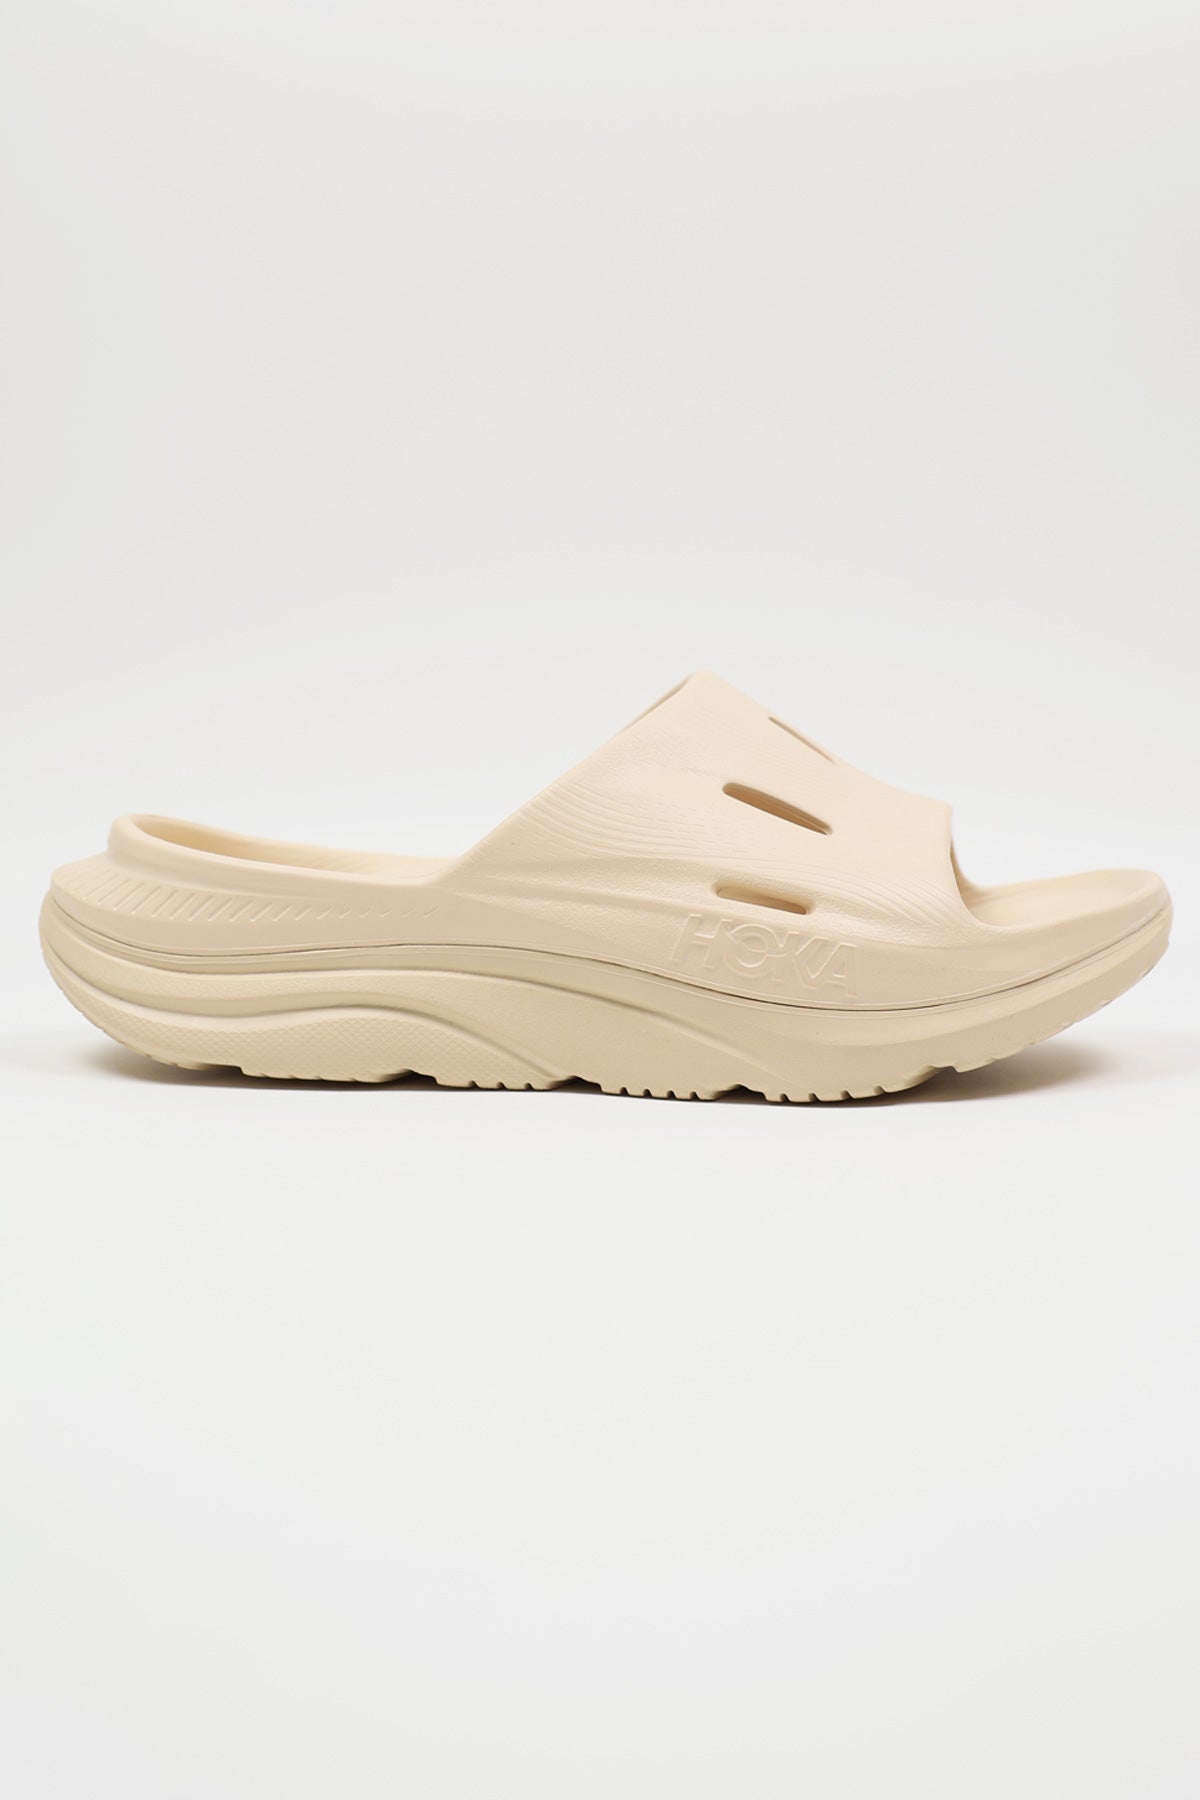 Ora Recovery Slide - Shifting Sands/Beige – Canoe Club